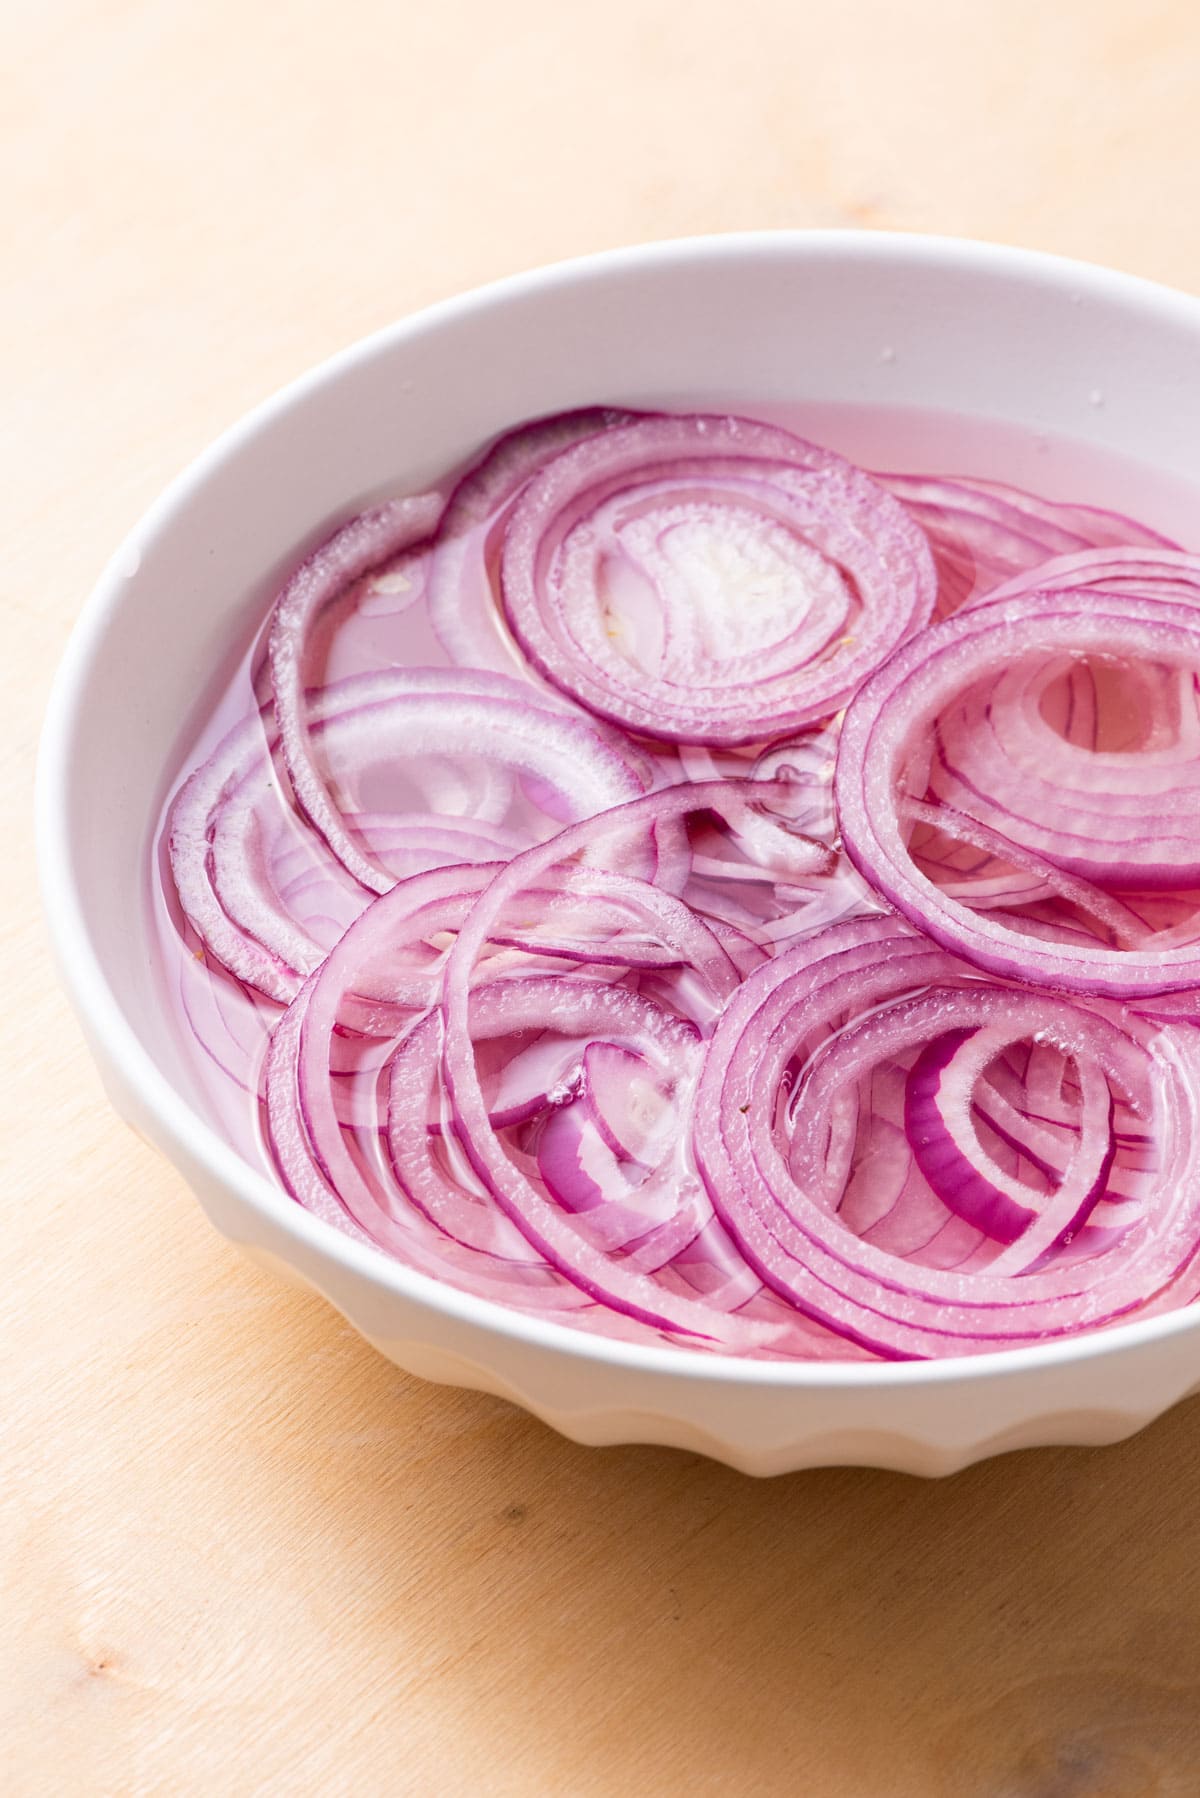 Thin rings of red onion marinating in a bowl of pickling liquid.